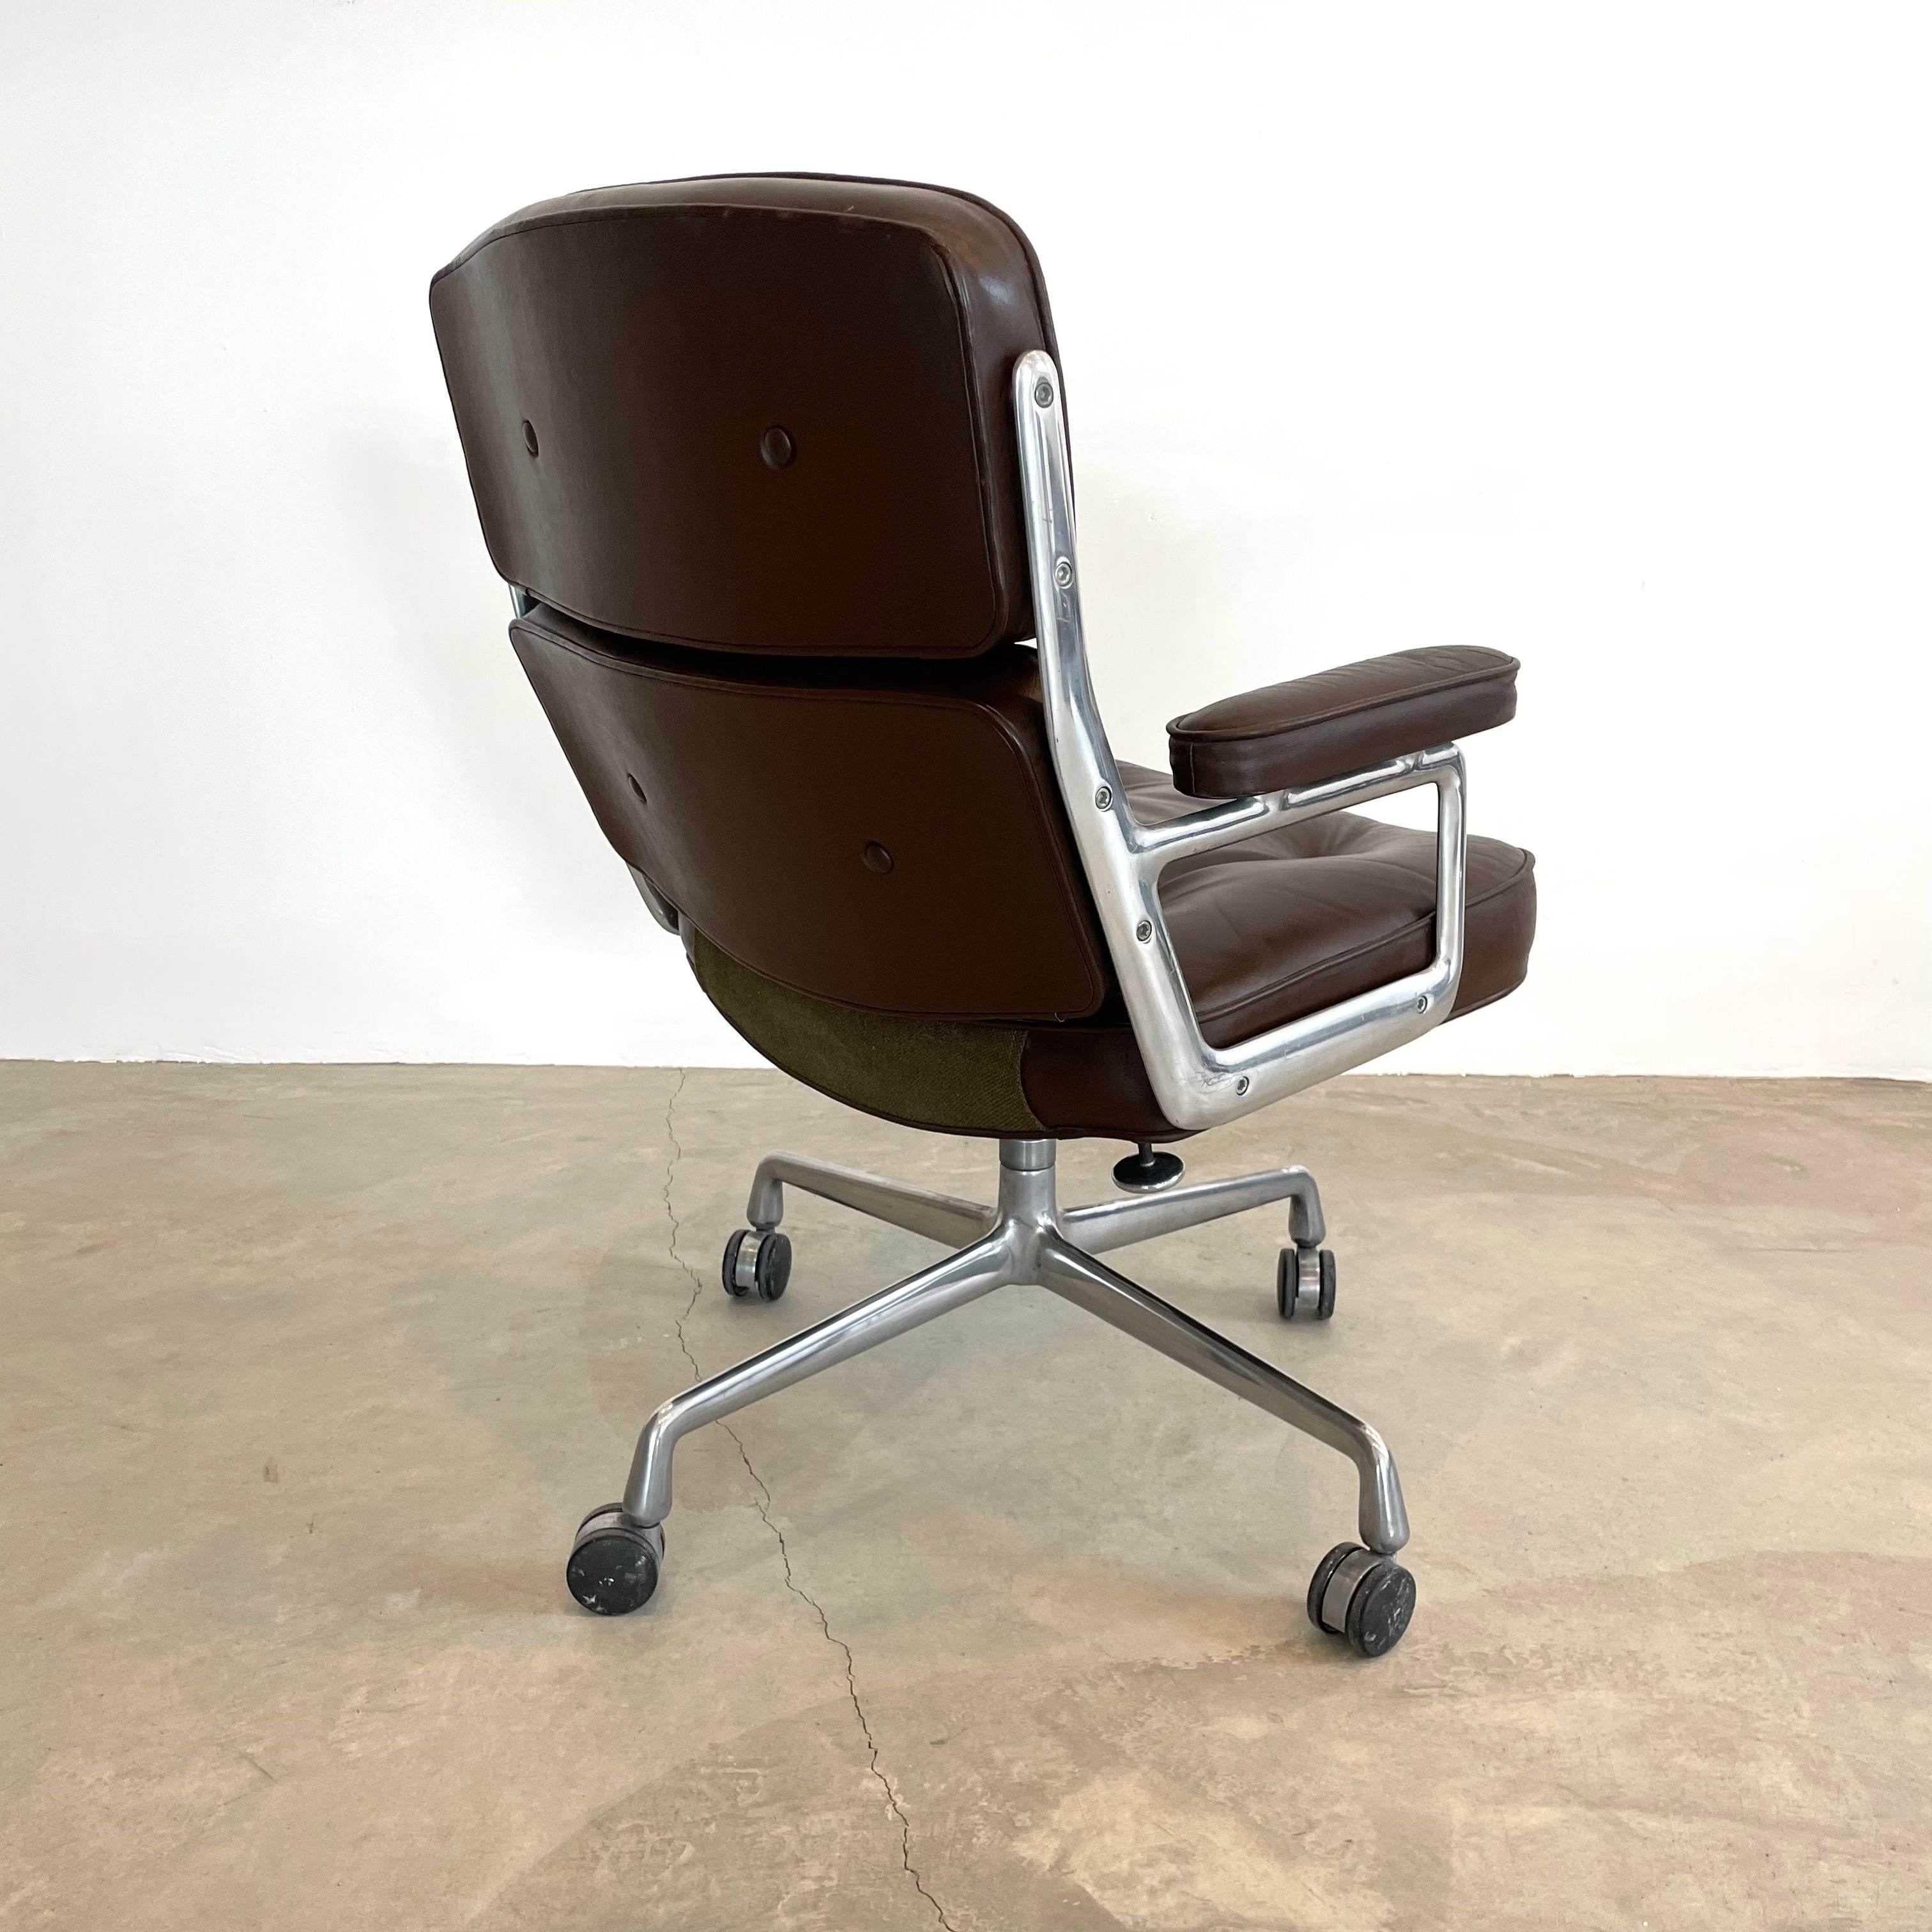 Eames Time Life Chair in Chocolate Leather for Herman Miller, 1978 USA For Sale 8